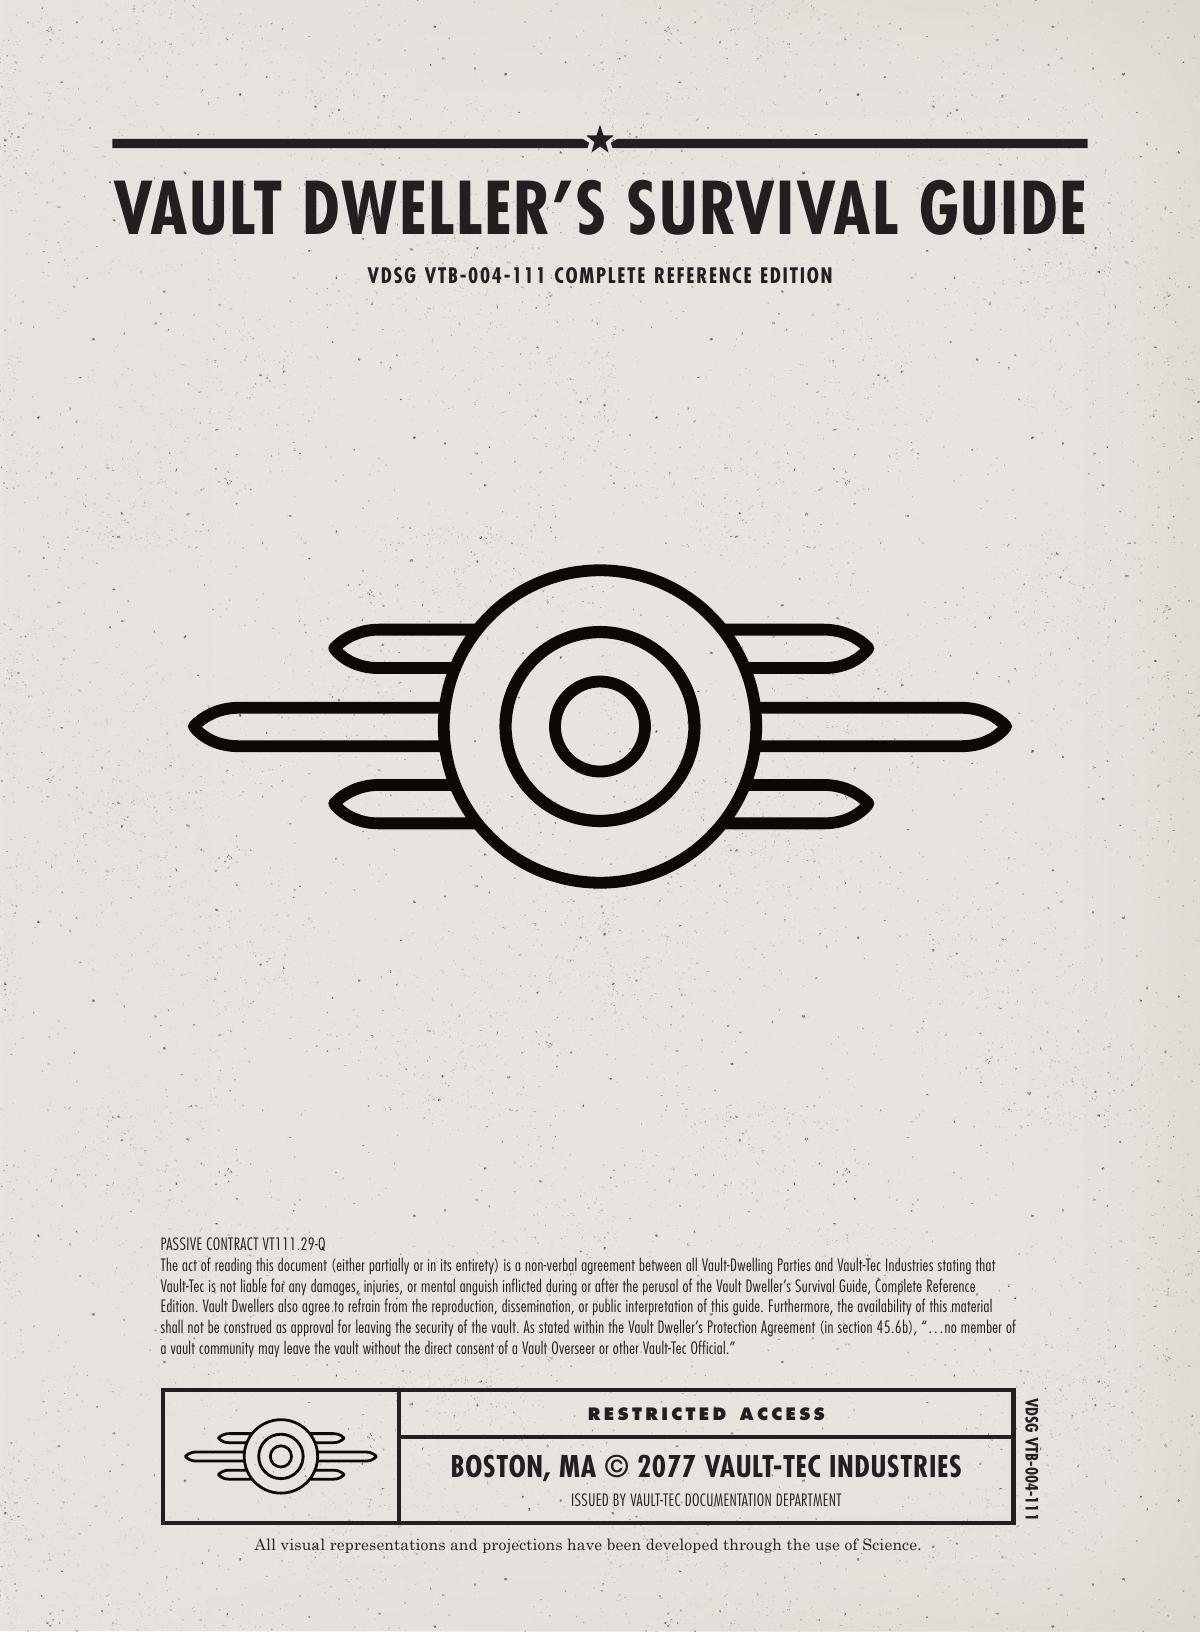 Fallout 4 Vault Dweller's Survival Guide by Prima Official Game Guide